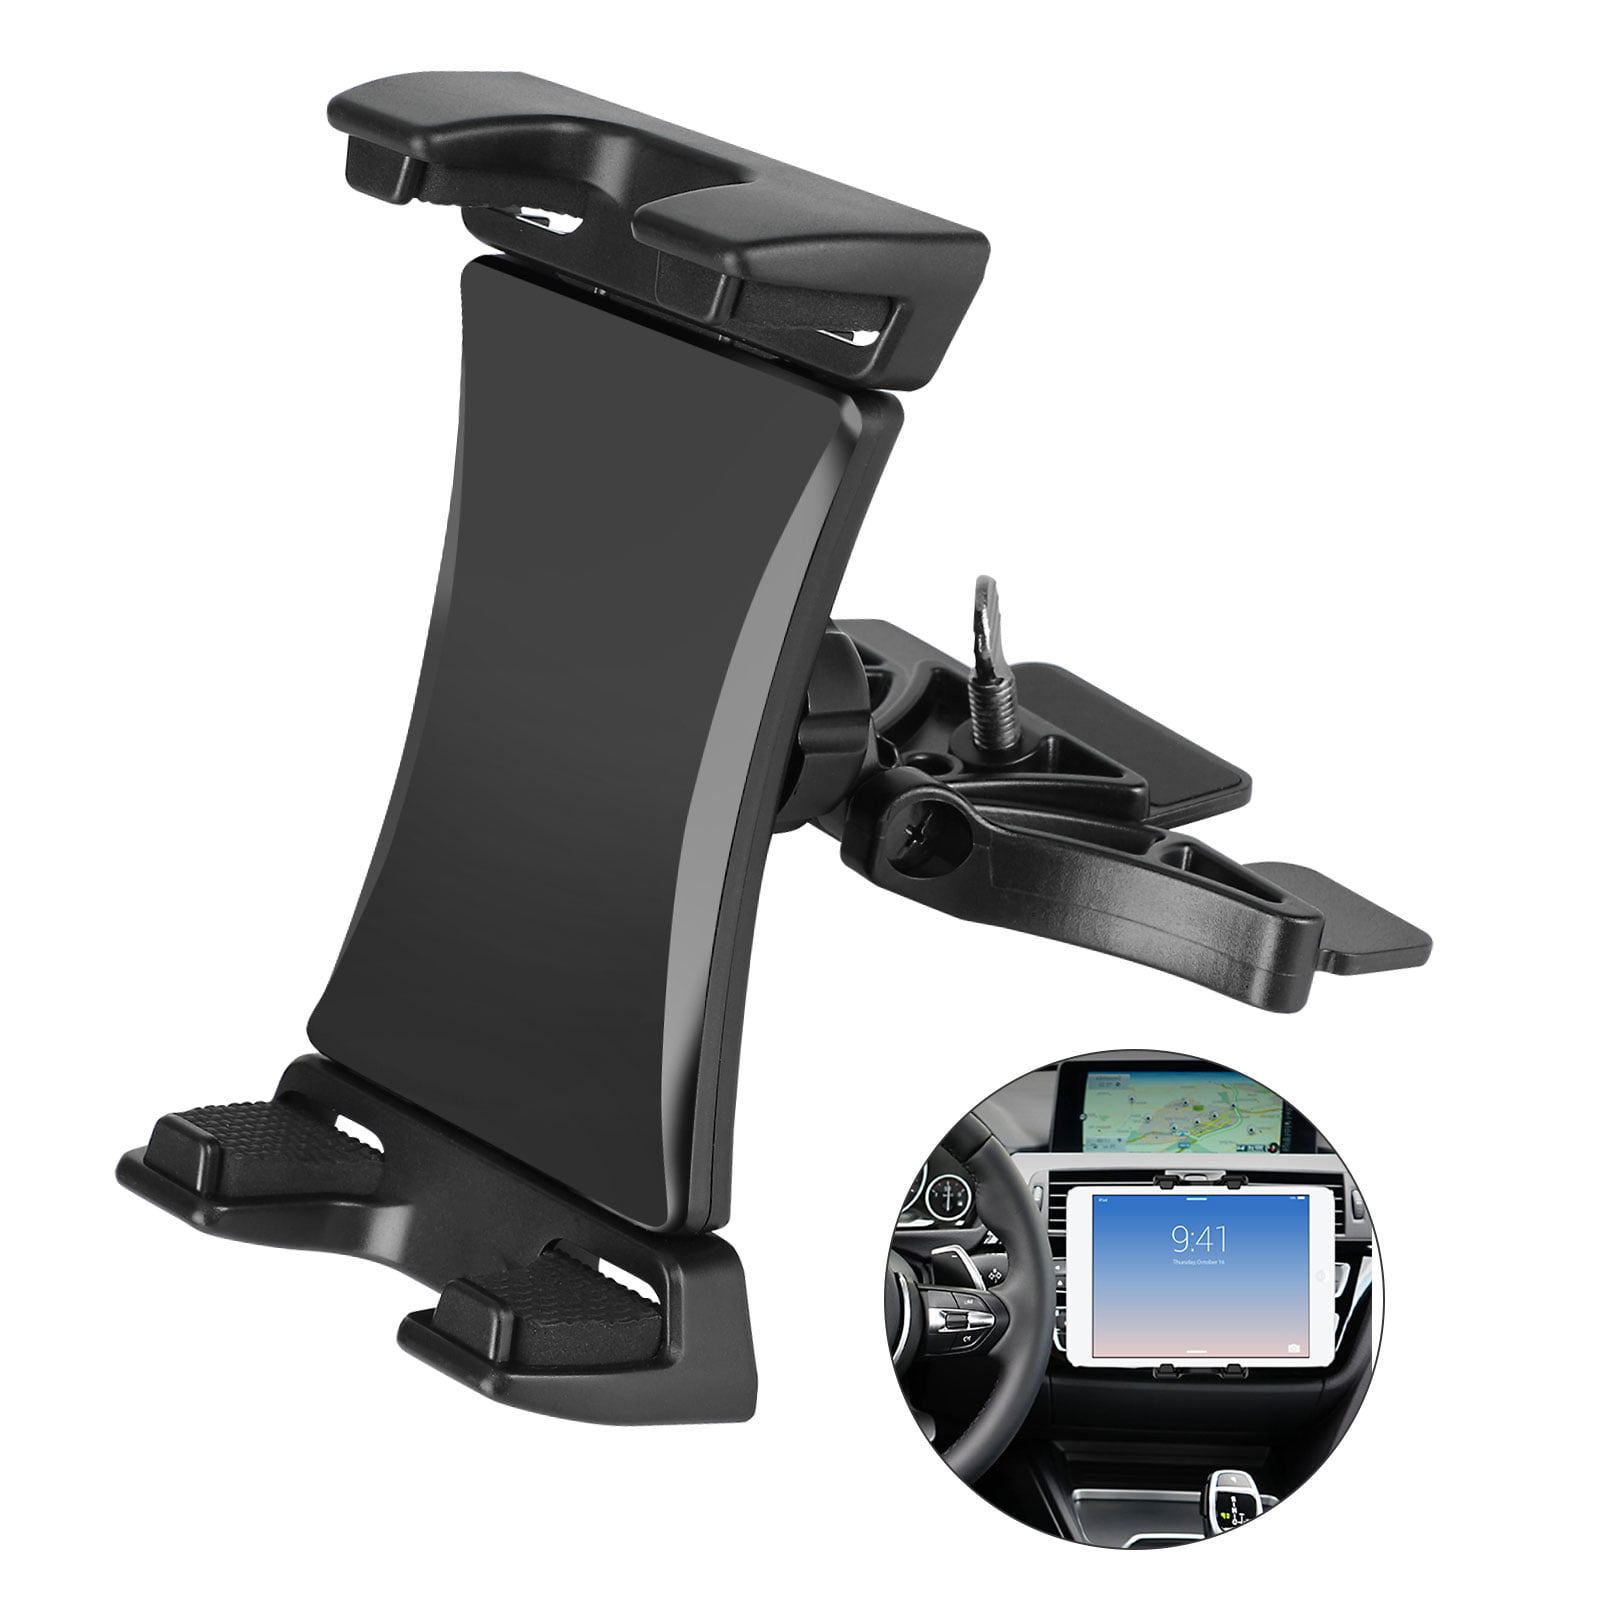 LinkStyle 2 in 1 CD Slot Tablet Car Mount 4-12 Tablets & Cellphones -Black Universal CD Player Car Phone Mount Compatible with Samsung Galaxy/iPad Mini/iPad Air/iPad Pro/iPhone Xs Max/XS/XR/GPS 